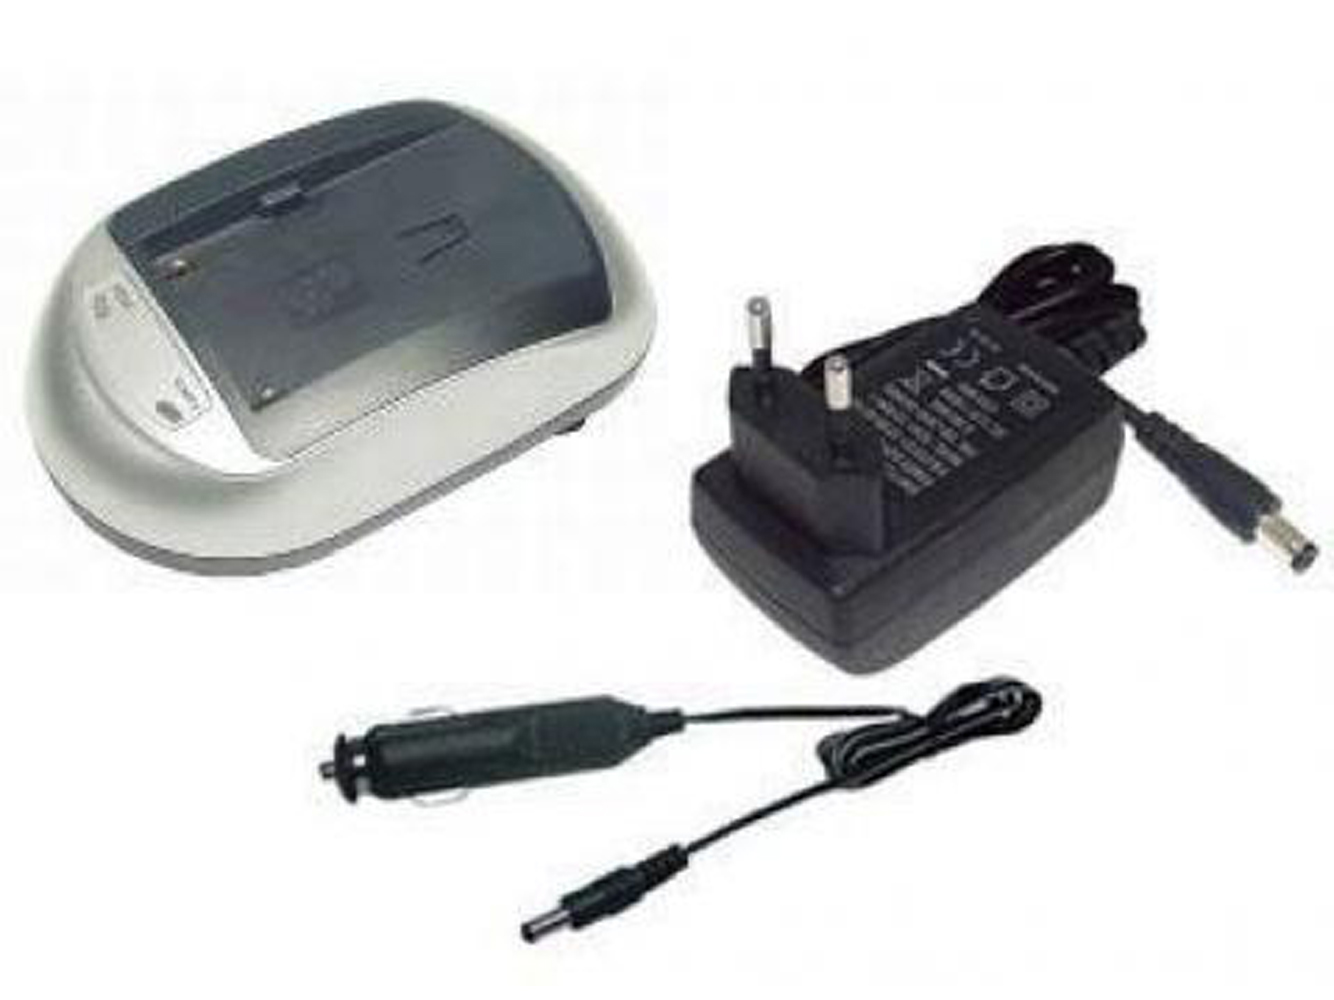 Sanyo Nc-lsc05, Ur-121 Battery Chargers For Idc-1000, Idc-1000z replacement